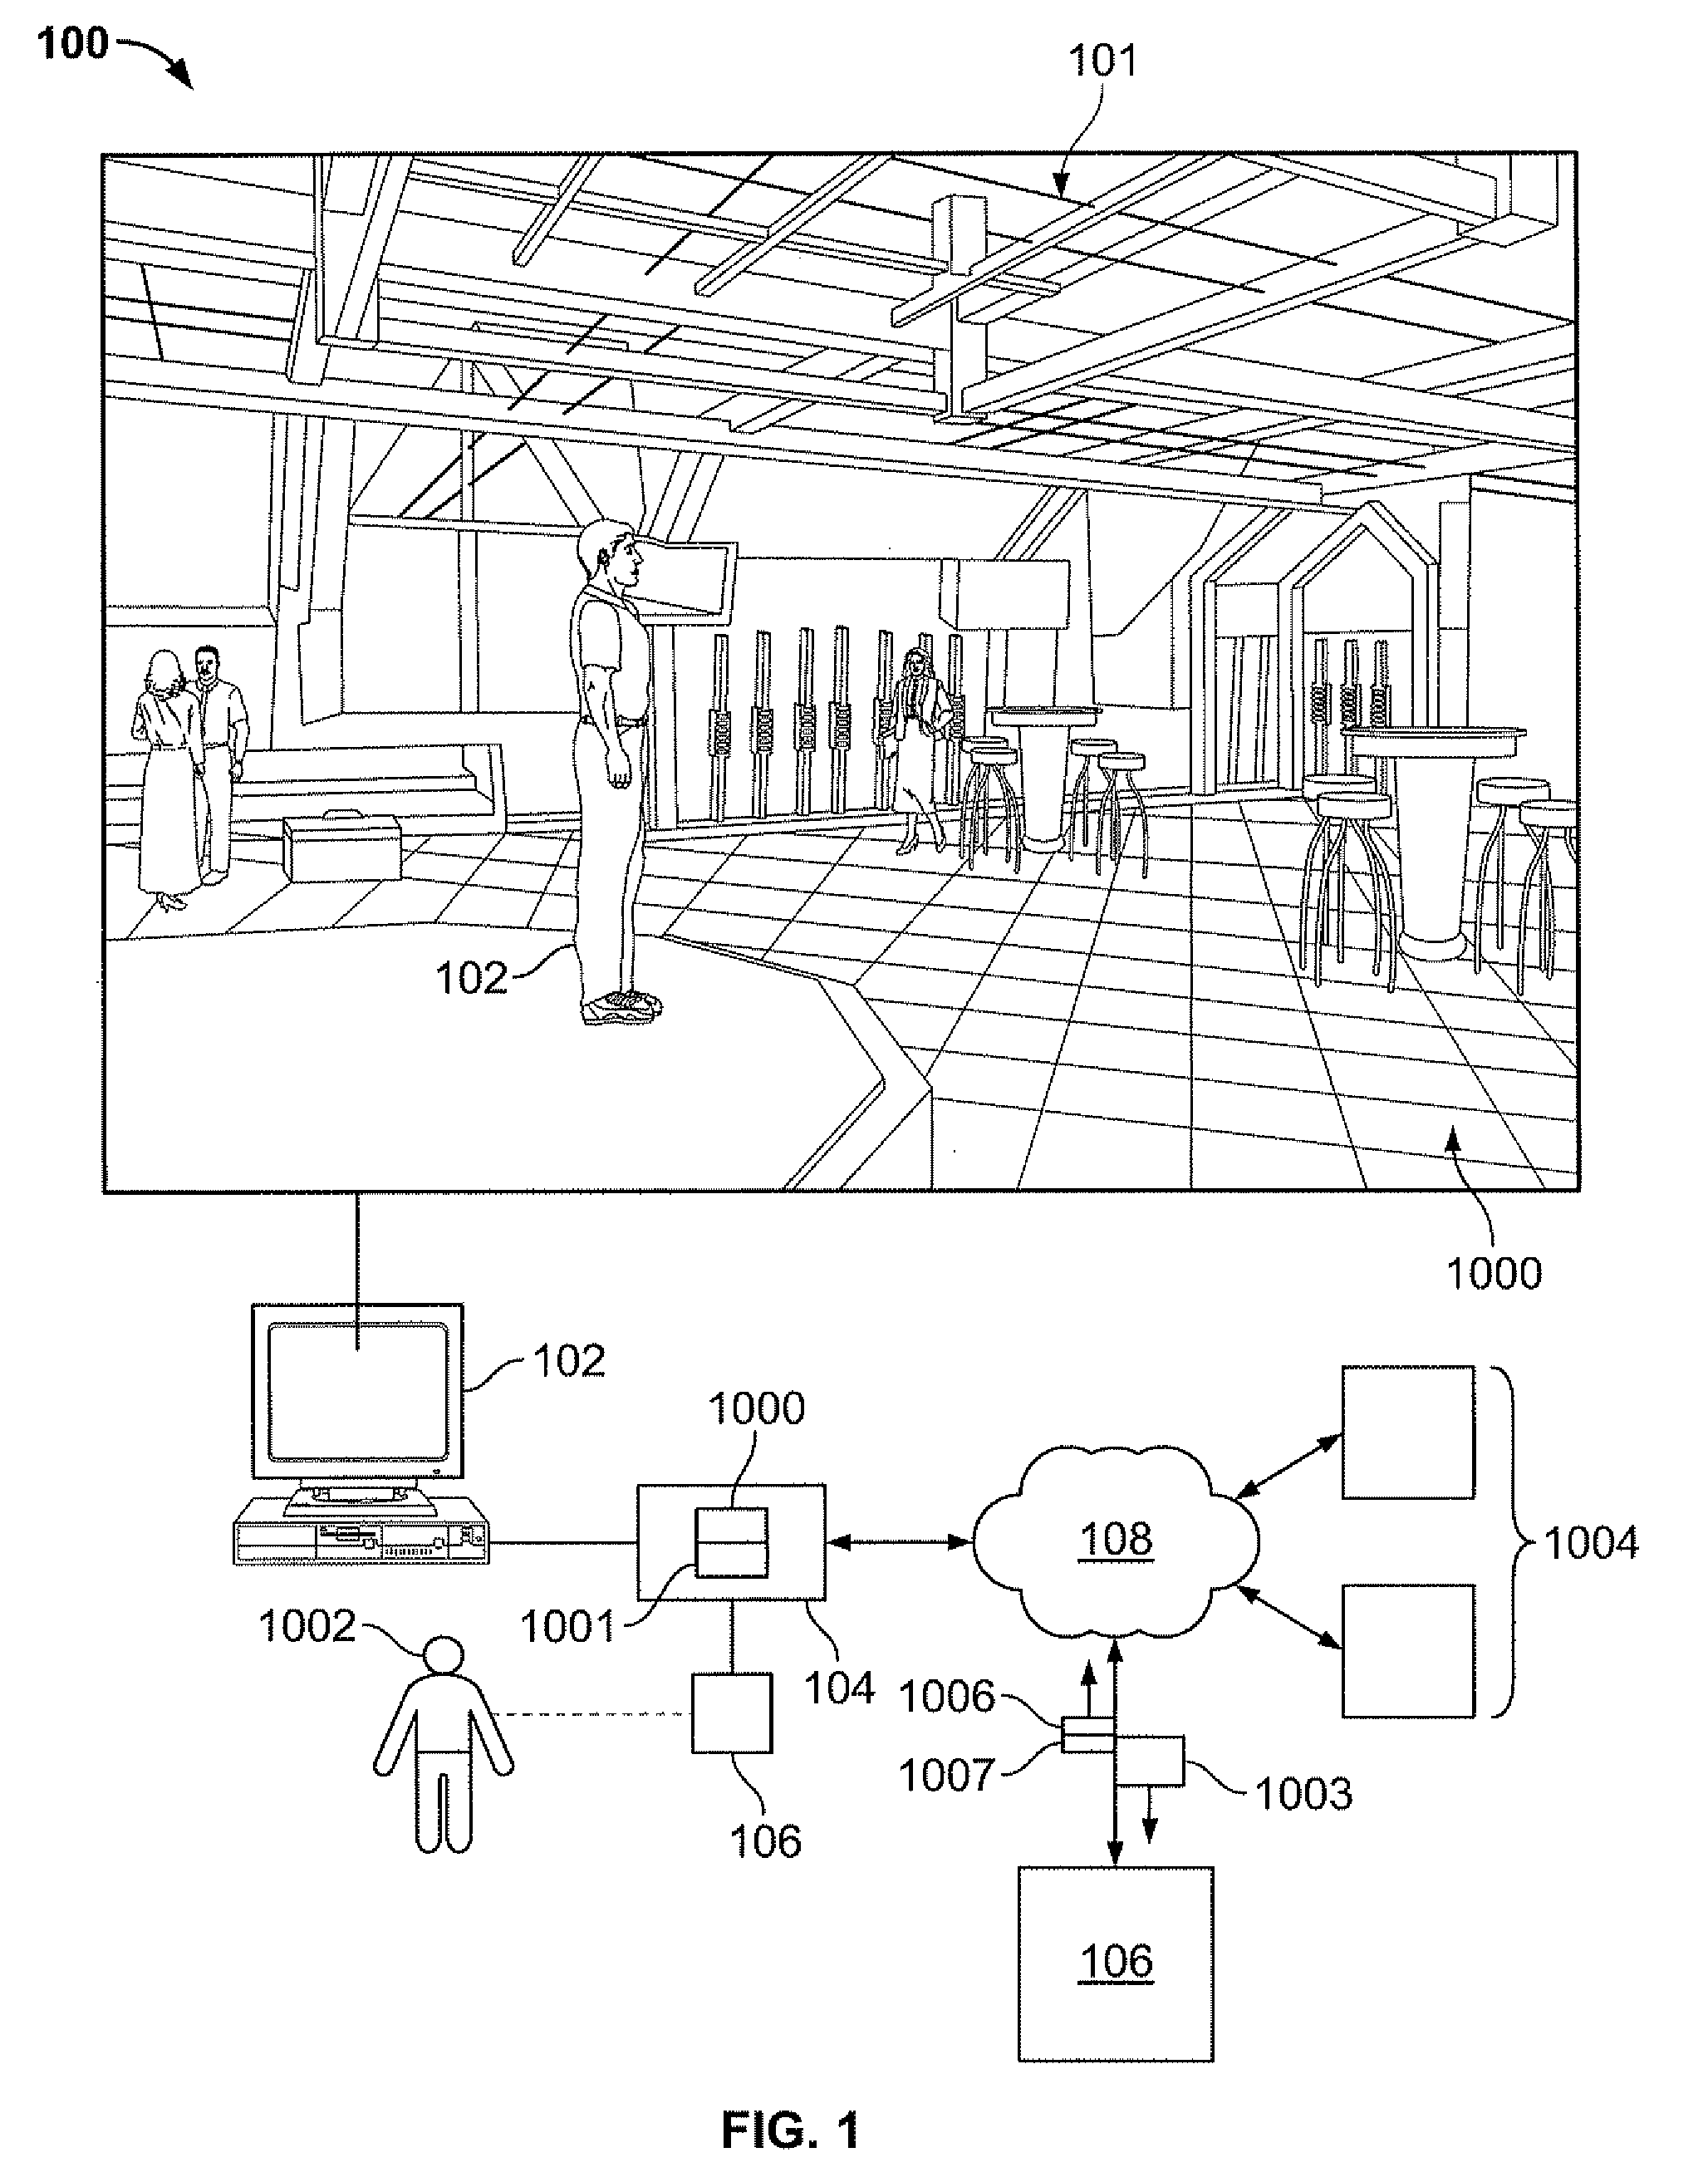 Selective filtering of user input data in a multi-user virtual environment